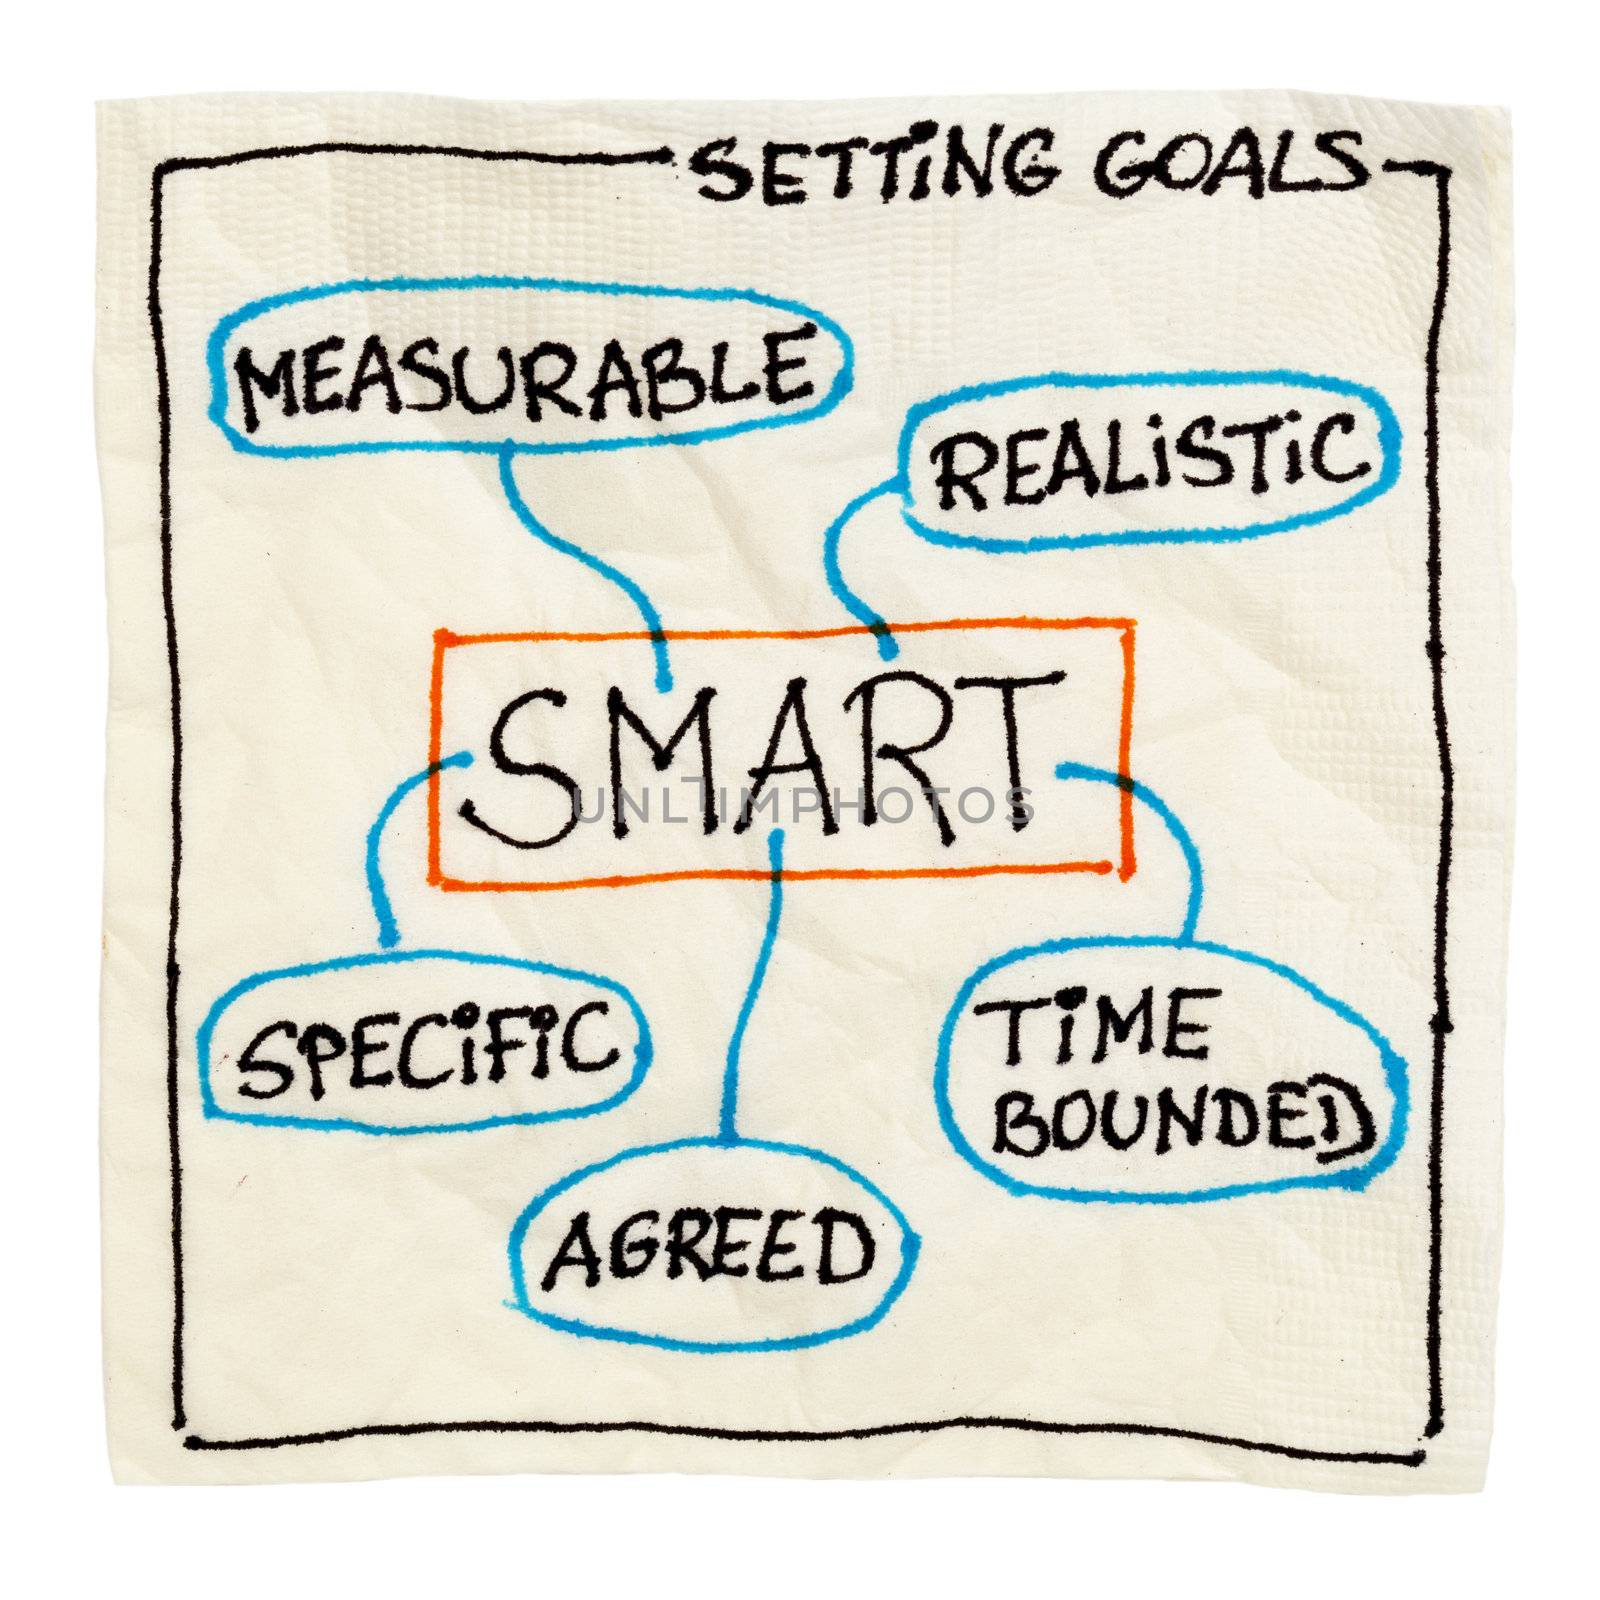 SMART (Specific, Measurable, Agreed, Realistic, Time-bound) goal setting concept - sketch on a cocktail napkin isolated on white